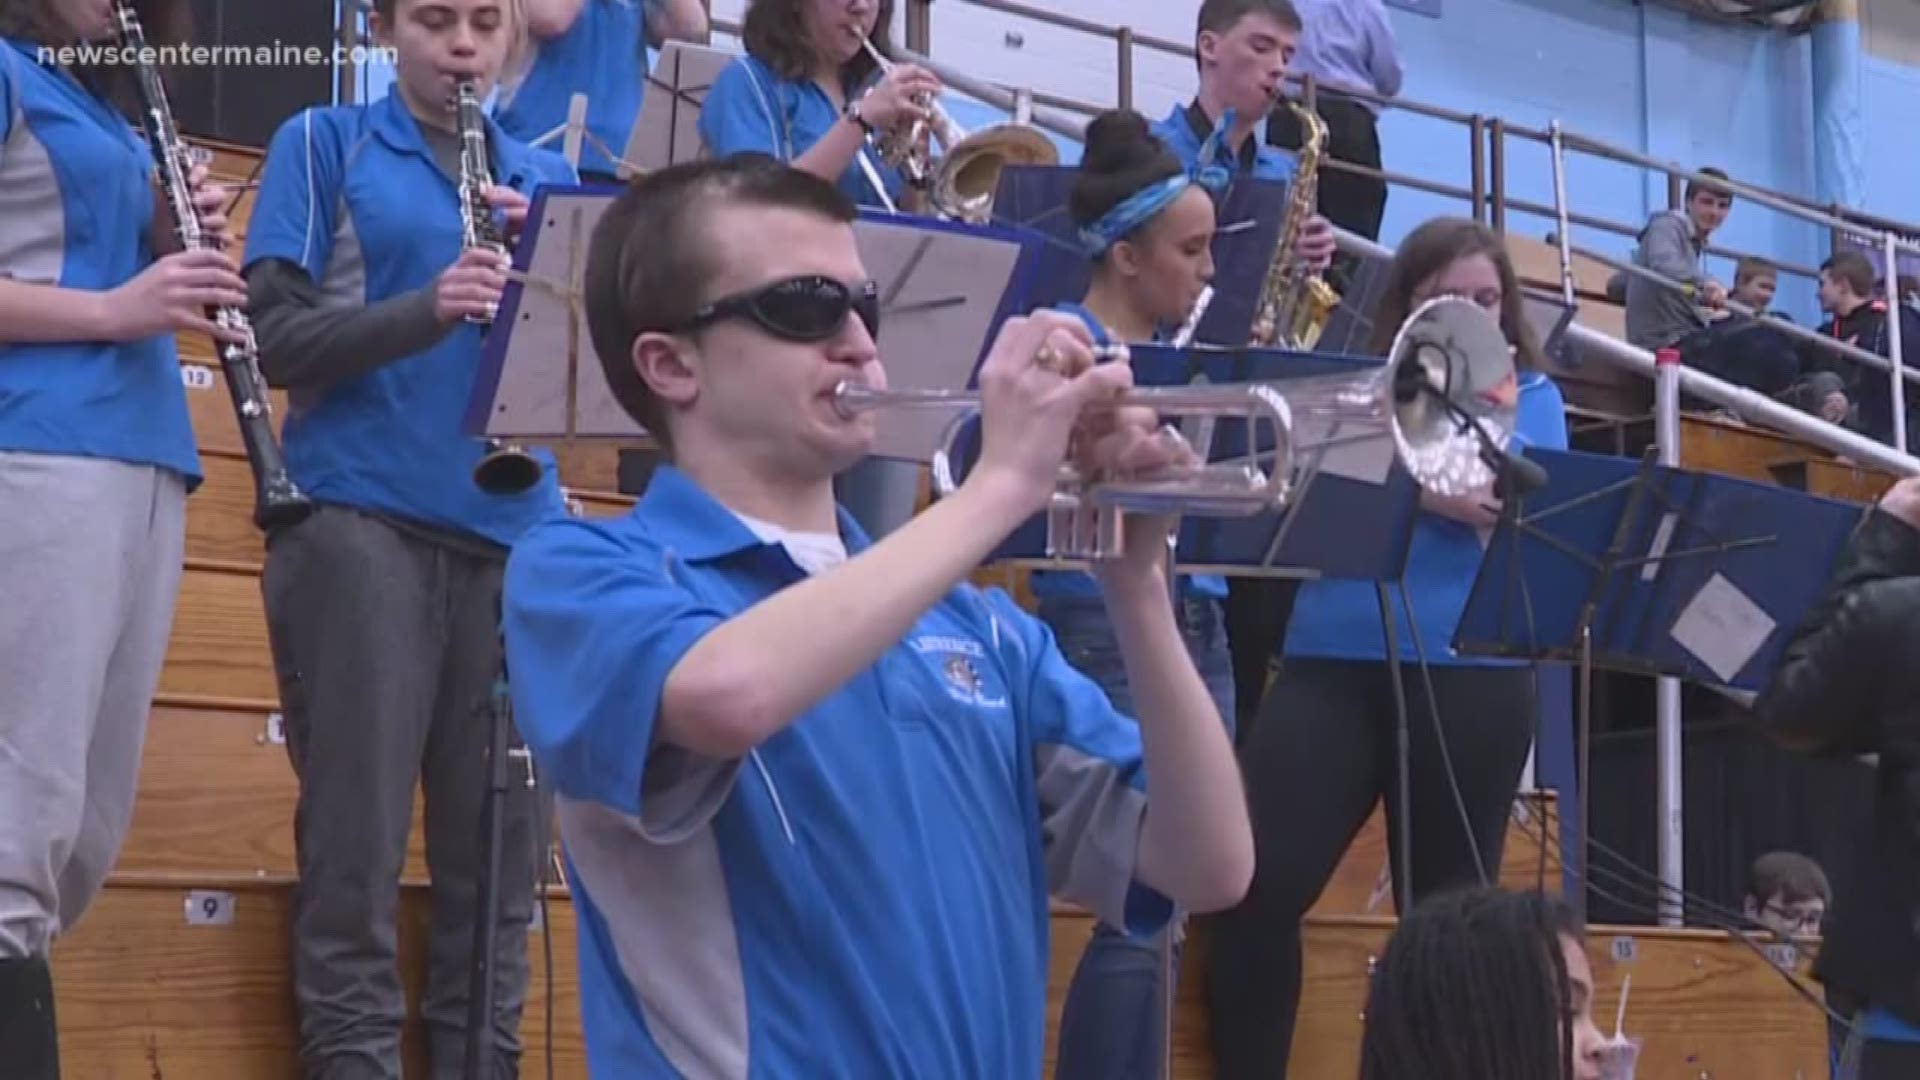 Nathanael Batson won't let vision loss stop him from rocking out at the tournament.